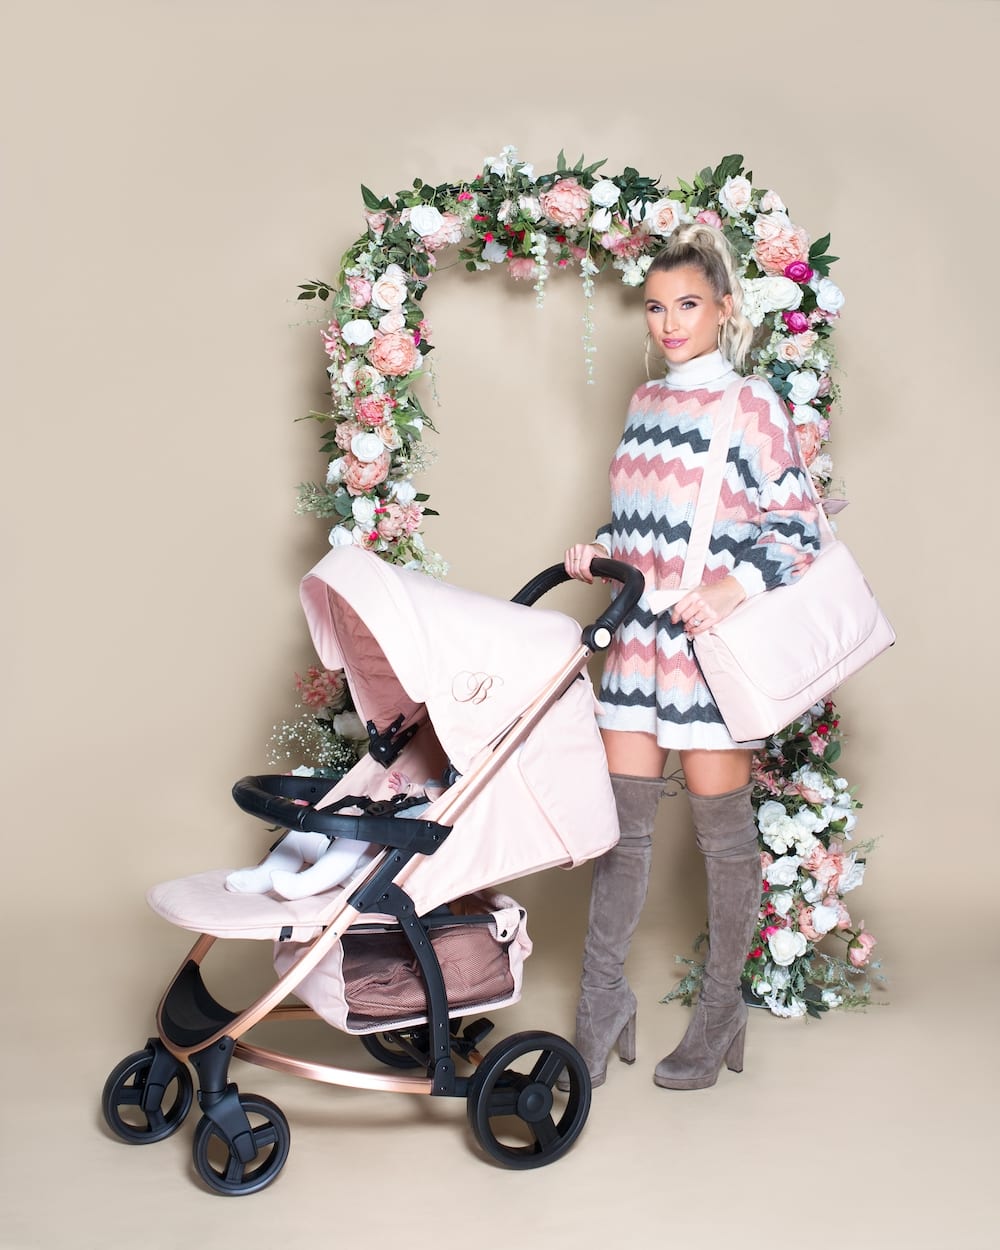 billie faiers mb200 travel system